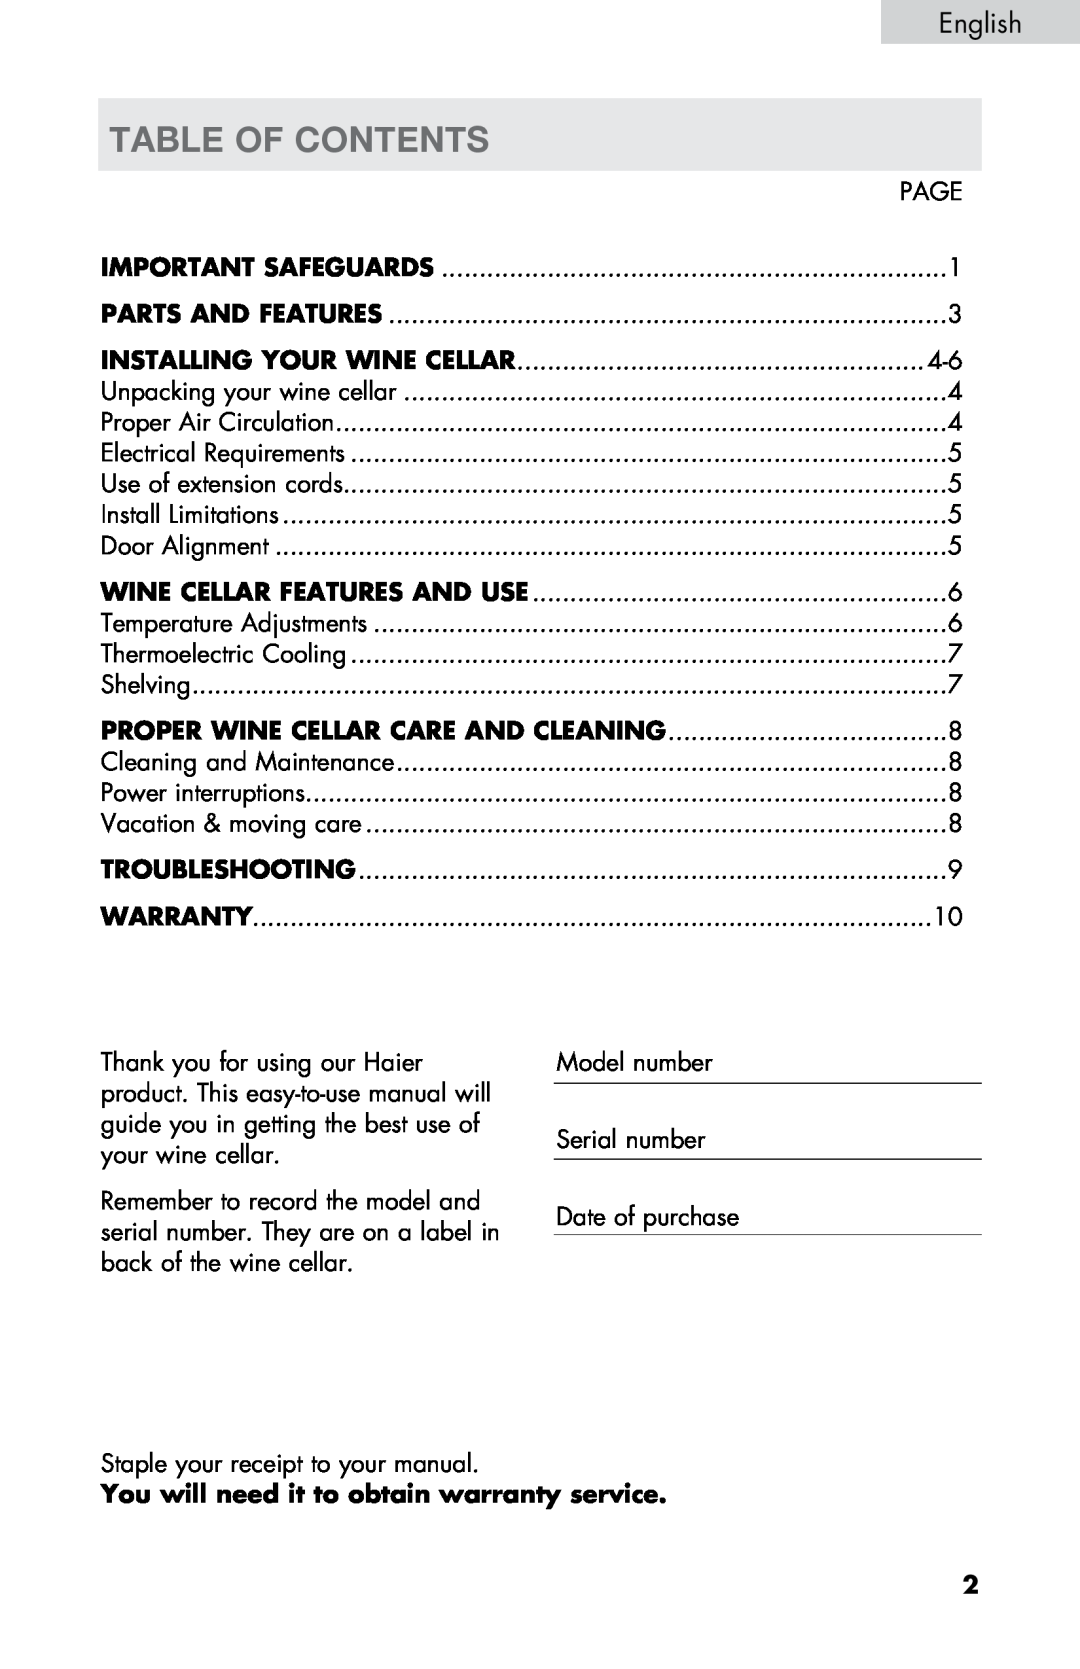 Haier HVTM08, HVTM06 Table Of Contents, Proper Wine Cellar Care And Cleaning, You will need it to obtain warranty service 